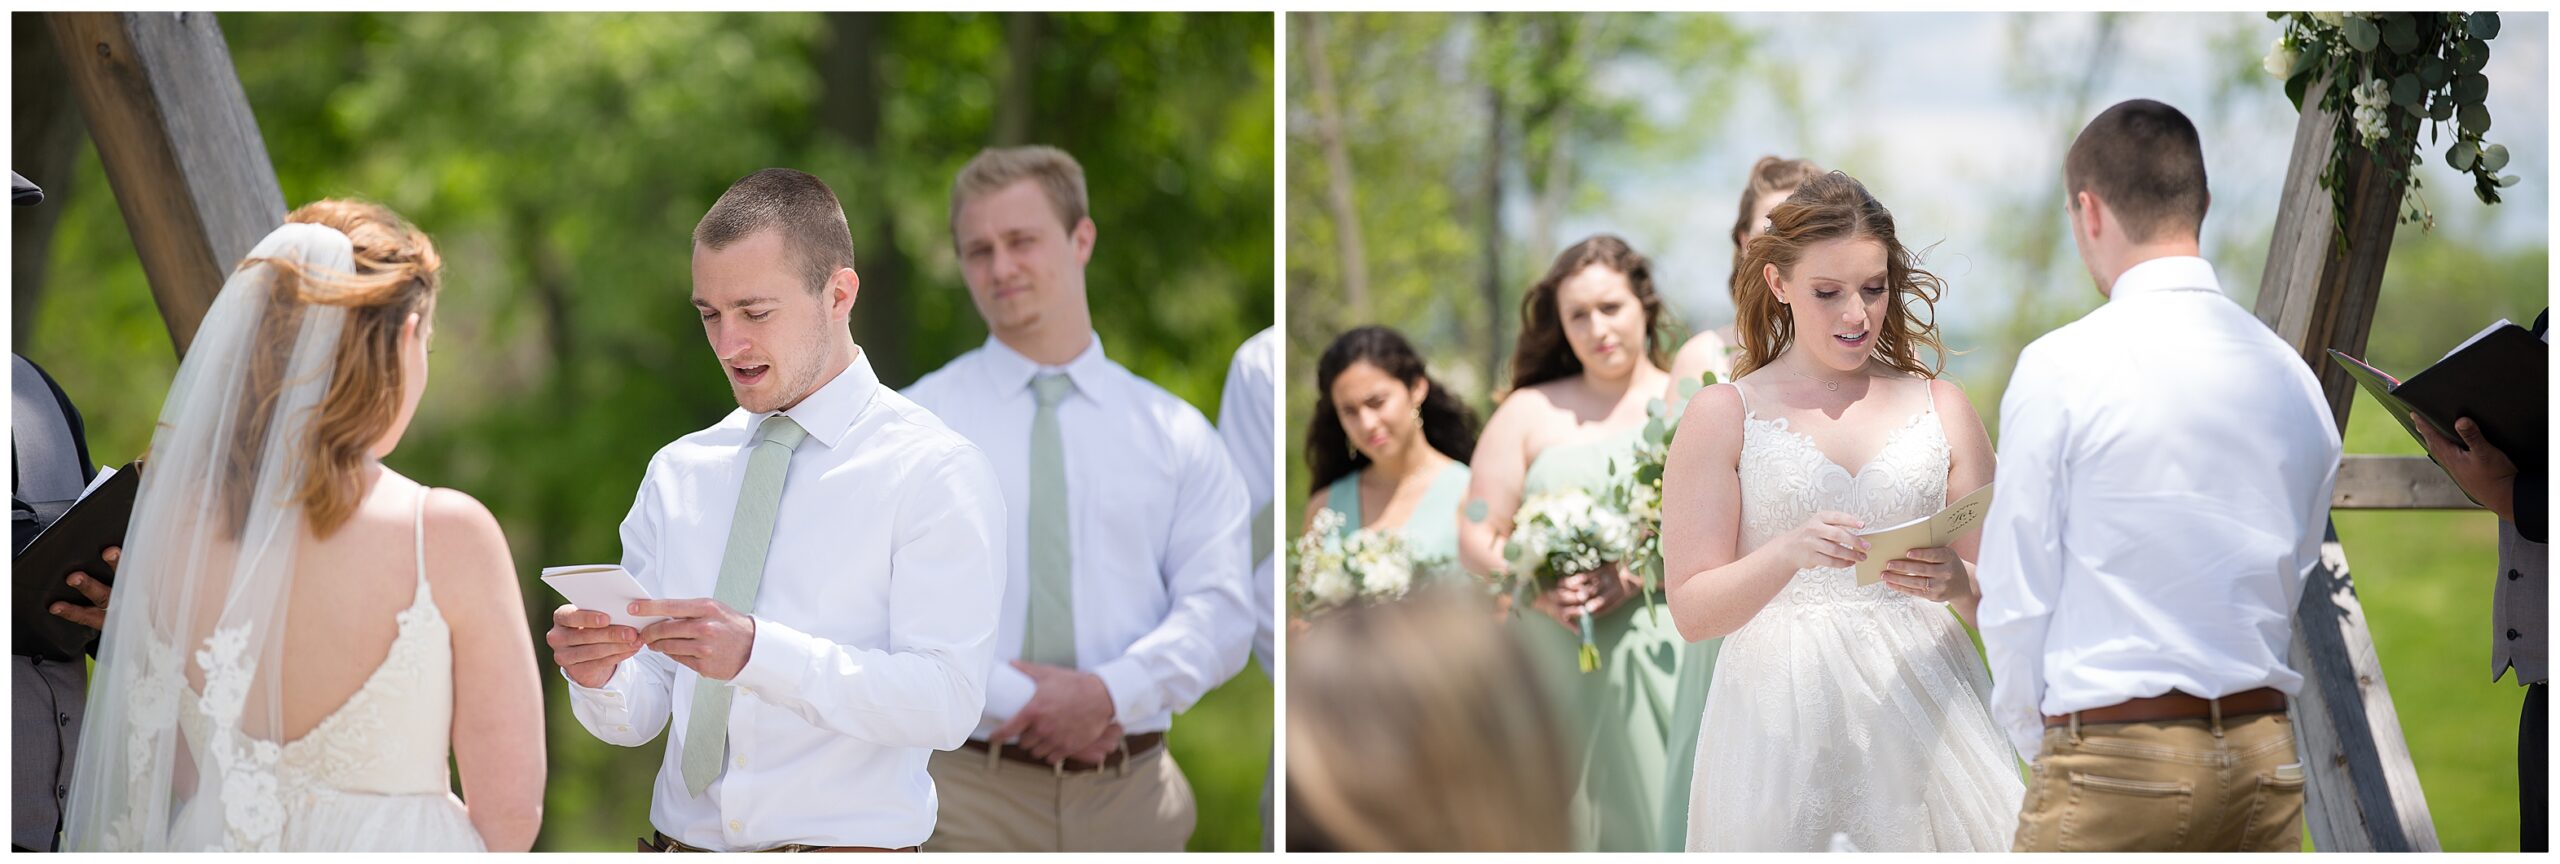 exchanging vows at Cooper's Ridge Event Venue in Boonville MO wedding photography by Bella Faith Photography